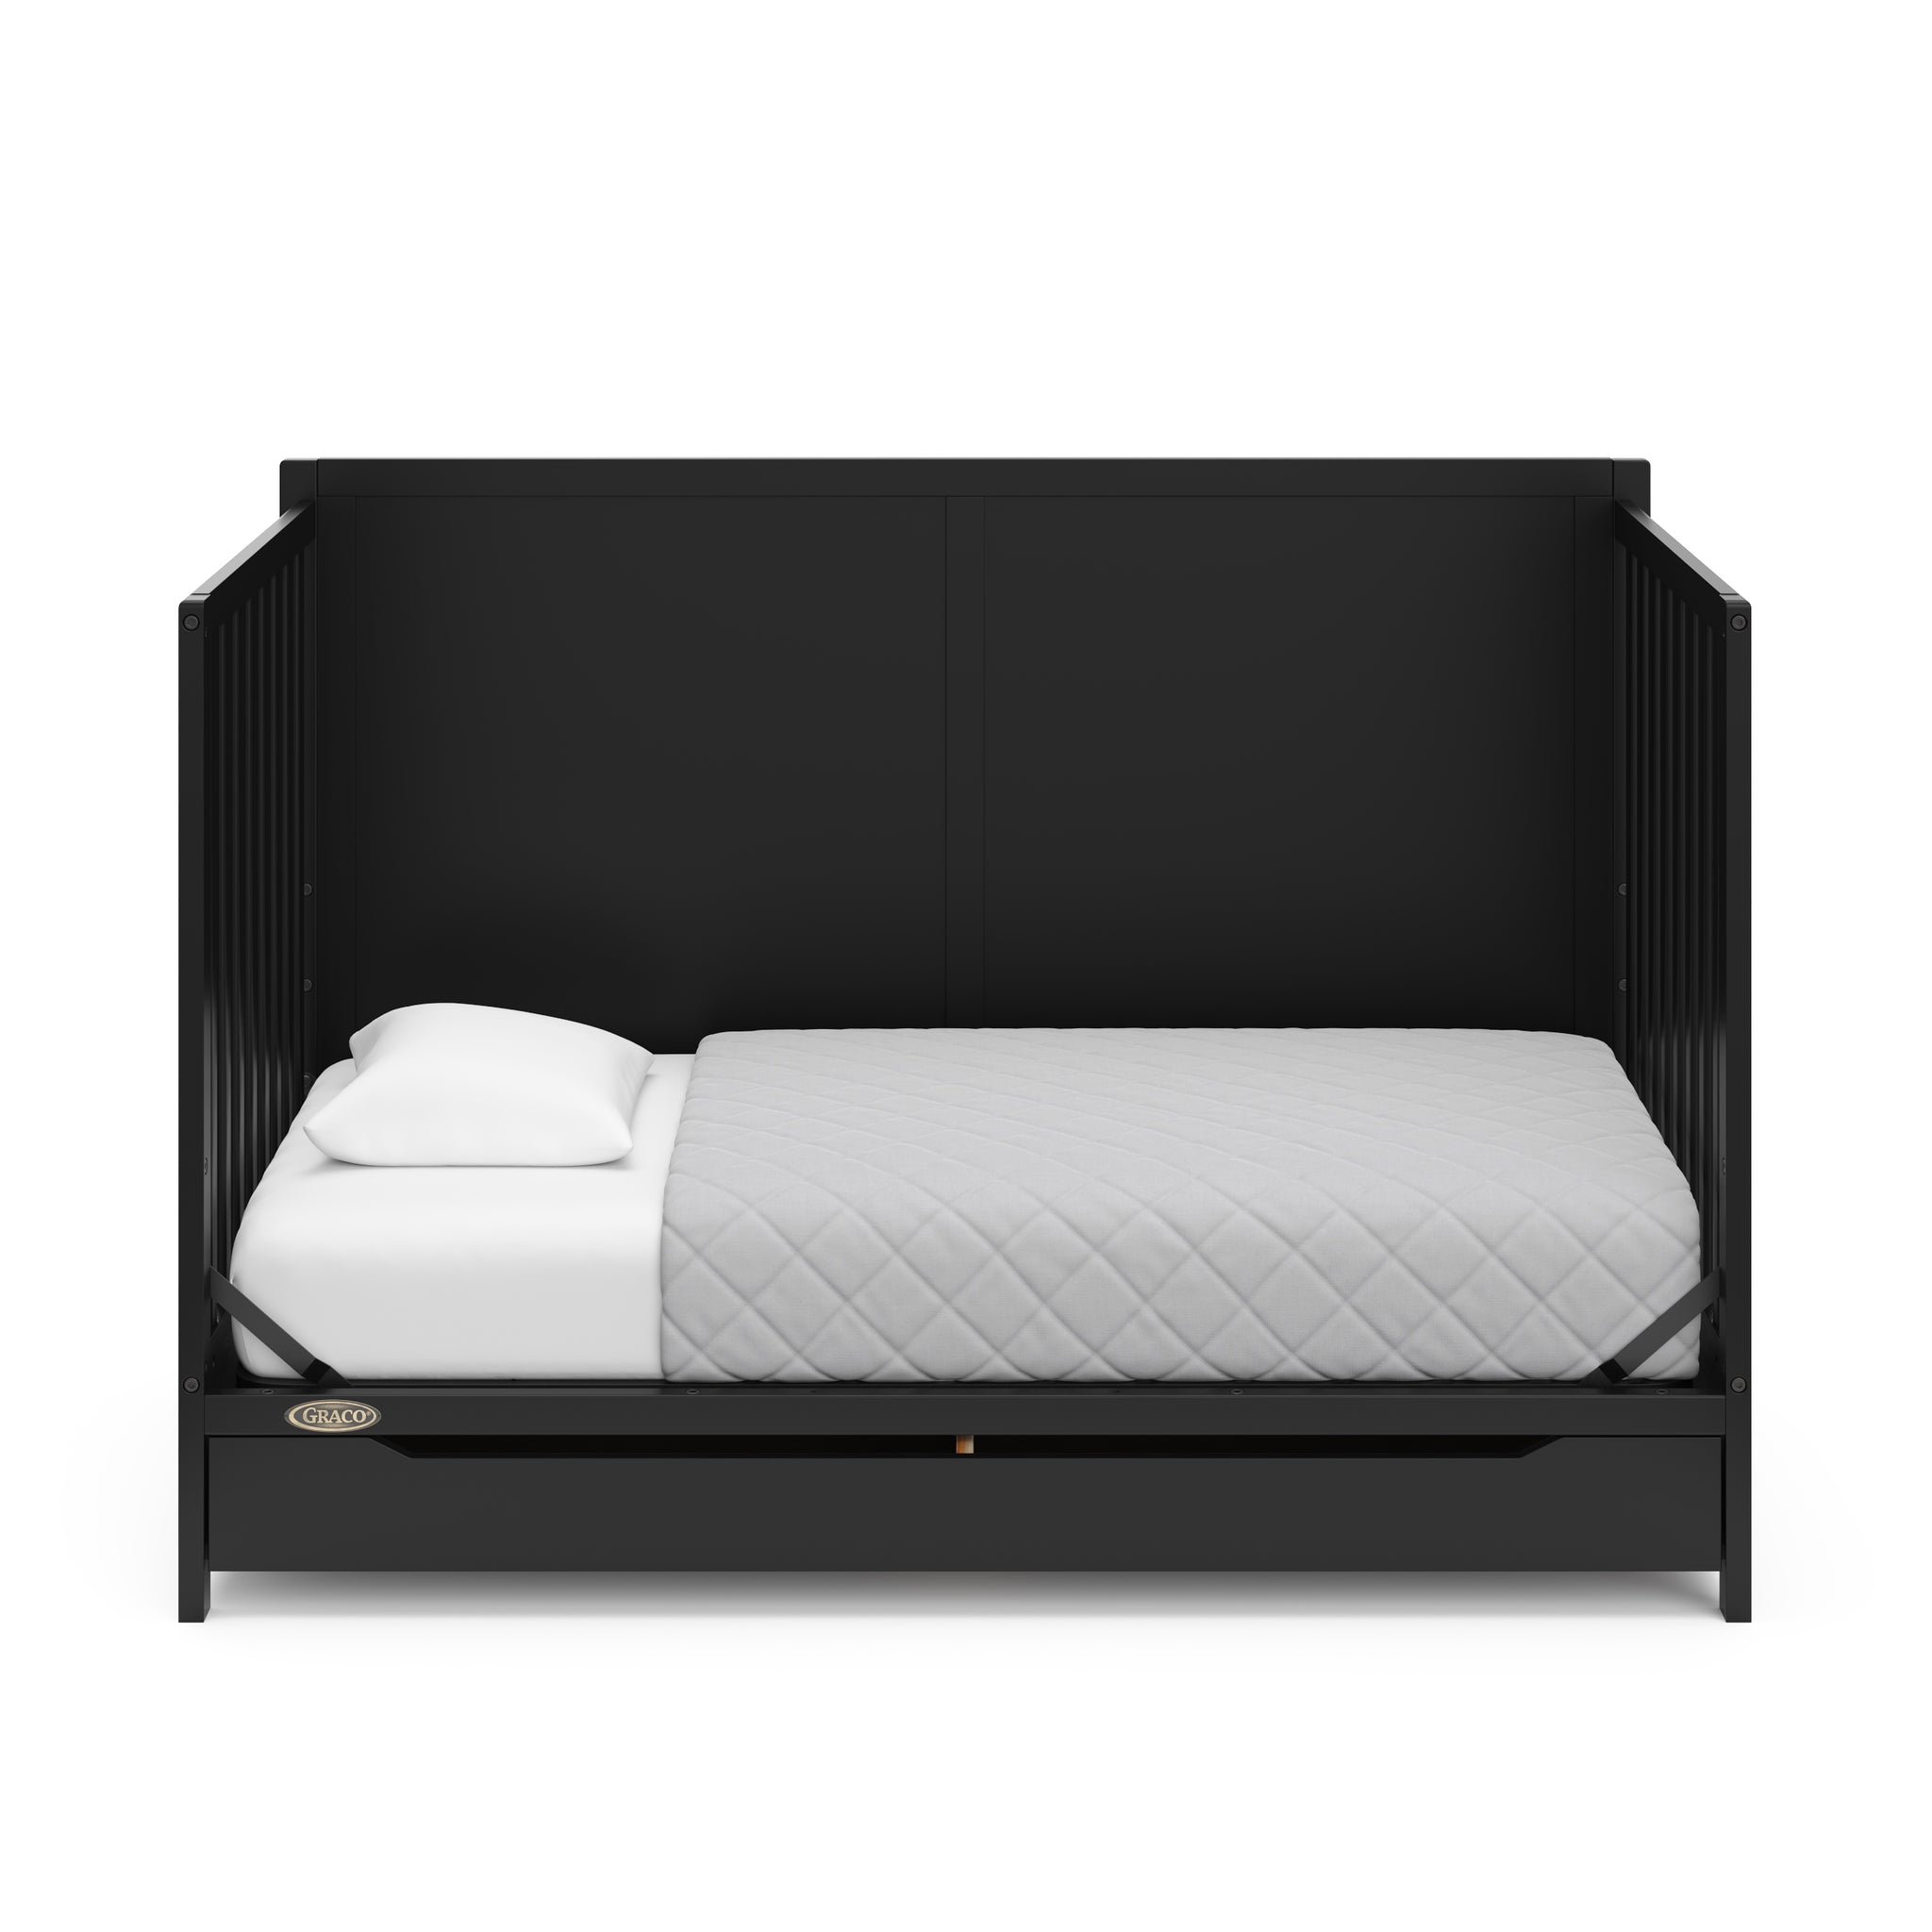 black crib with drawer in a toddler bed conversion